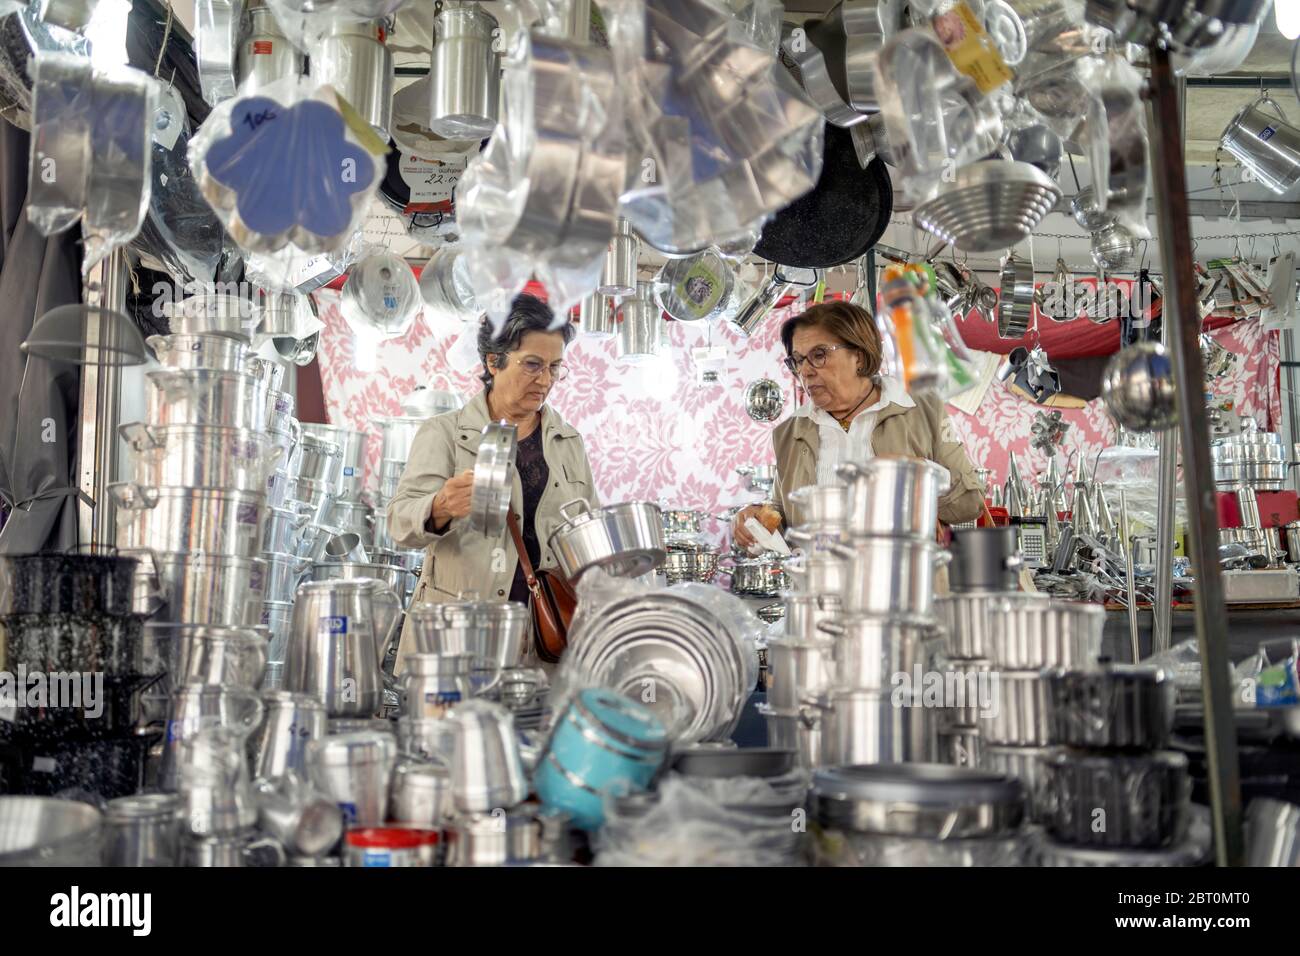 Faro, Portugal - November 23, 2019: Two middle aged women carefully choosing cooking pot from the outdoor stall Stock Photo